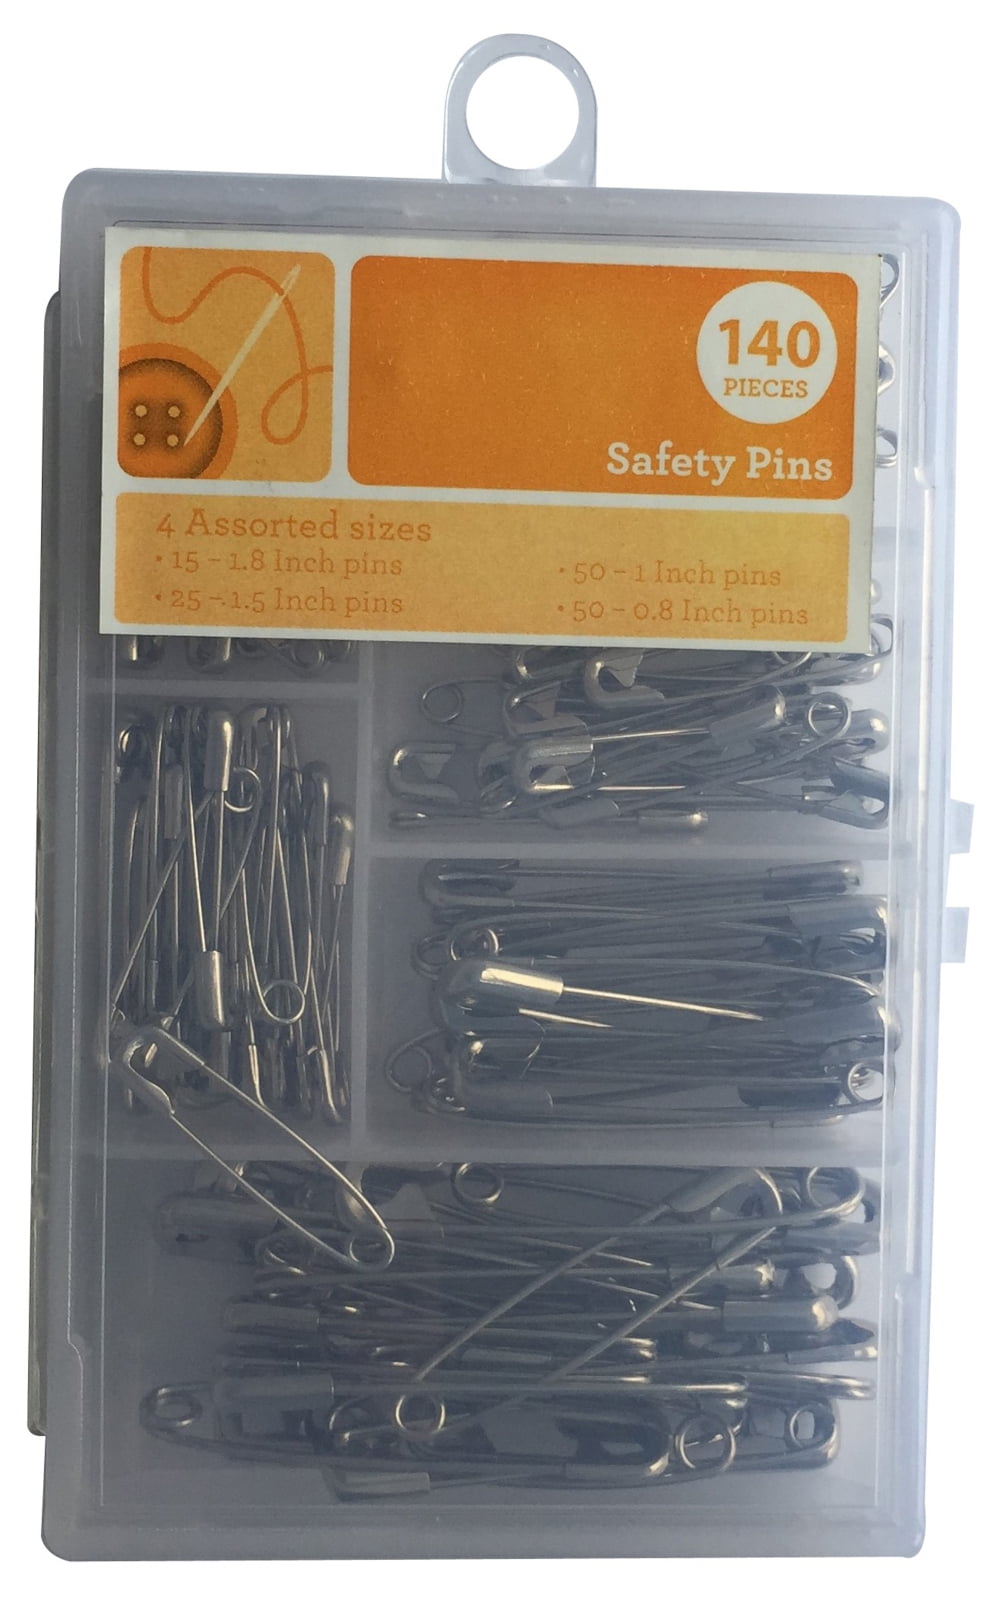 250 Pack Safety Pins by Luxurecourt, 4 Assorted Sizes of Durable, Silver  Small and Large Safety Pins Bulk, Rust-Resistant Nickel Plated Steel, Sharp